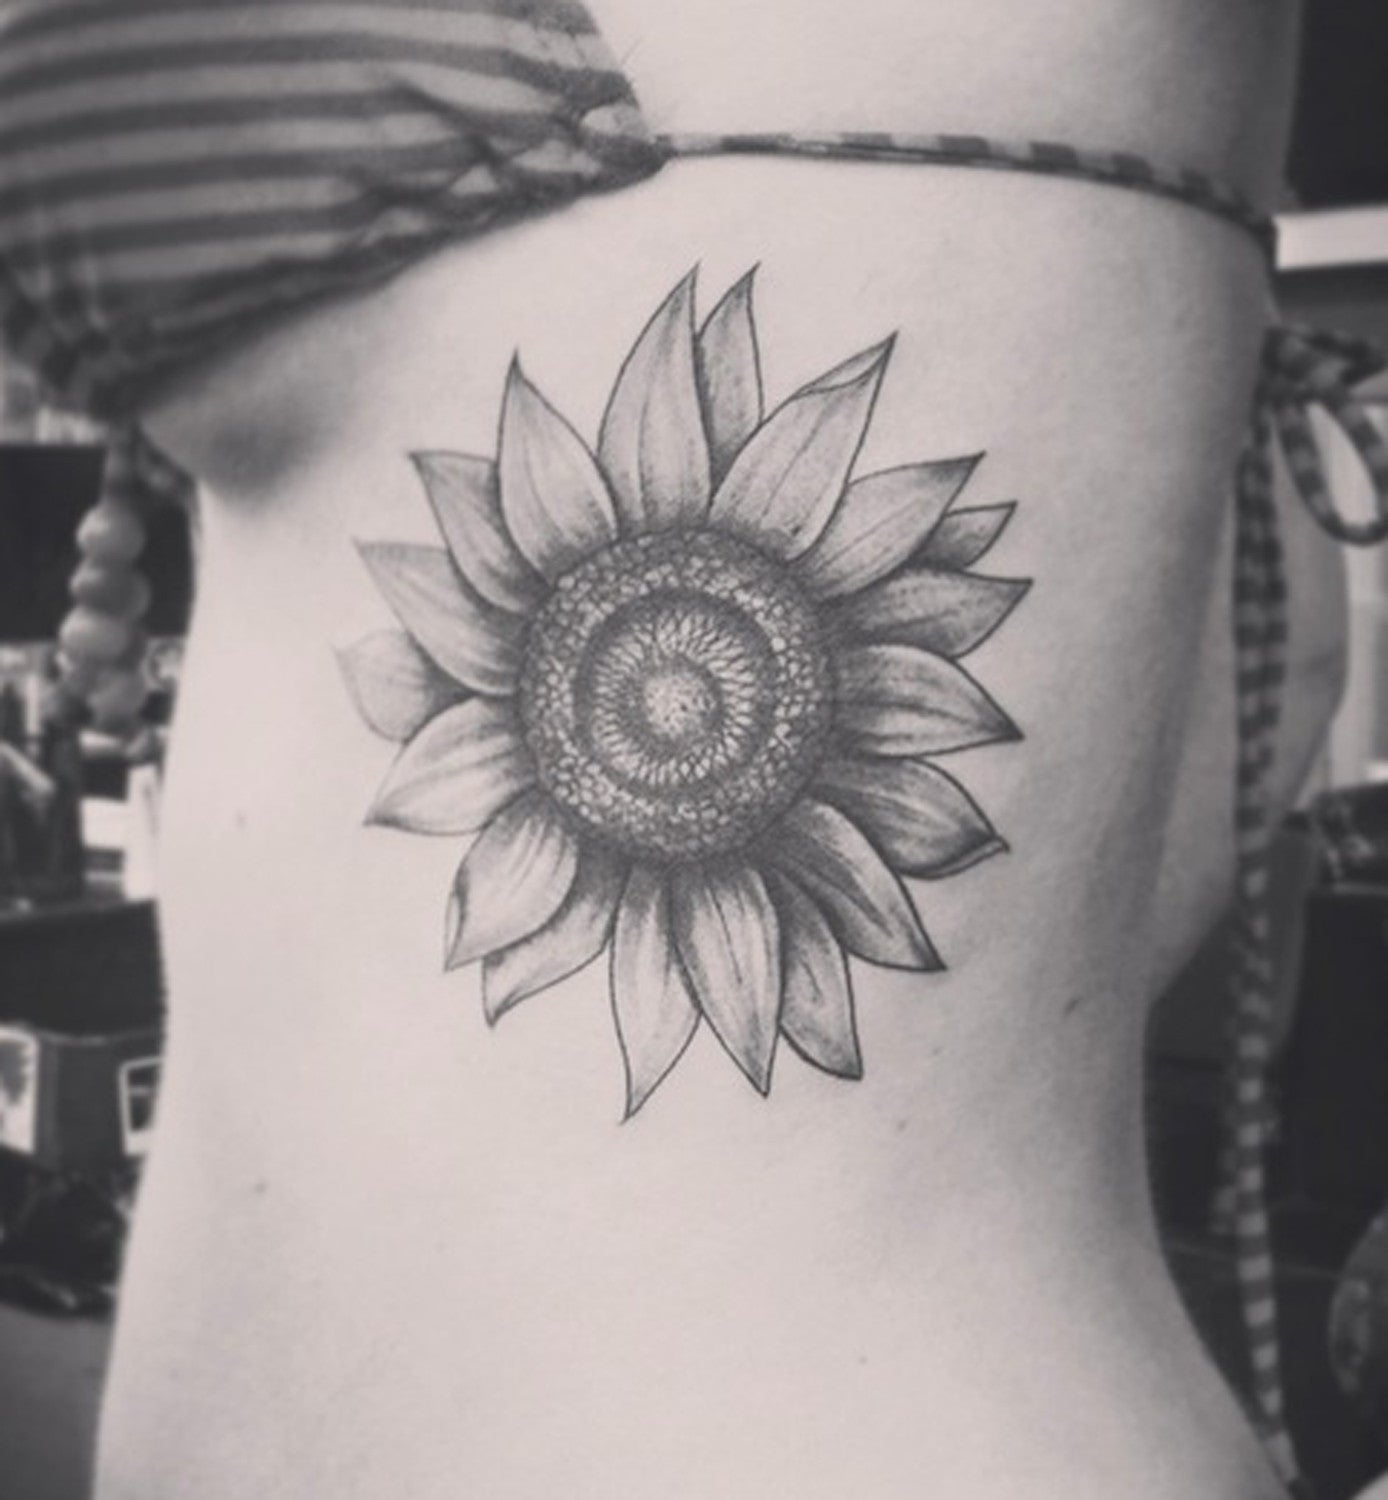 Realistic Large Black and White Sunflower Rib Tattoo Ideas for Women at MyBodiArt.com 